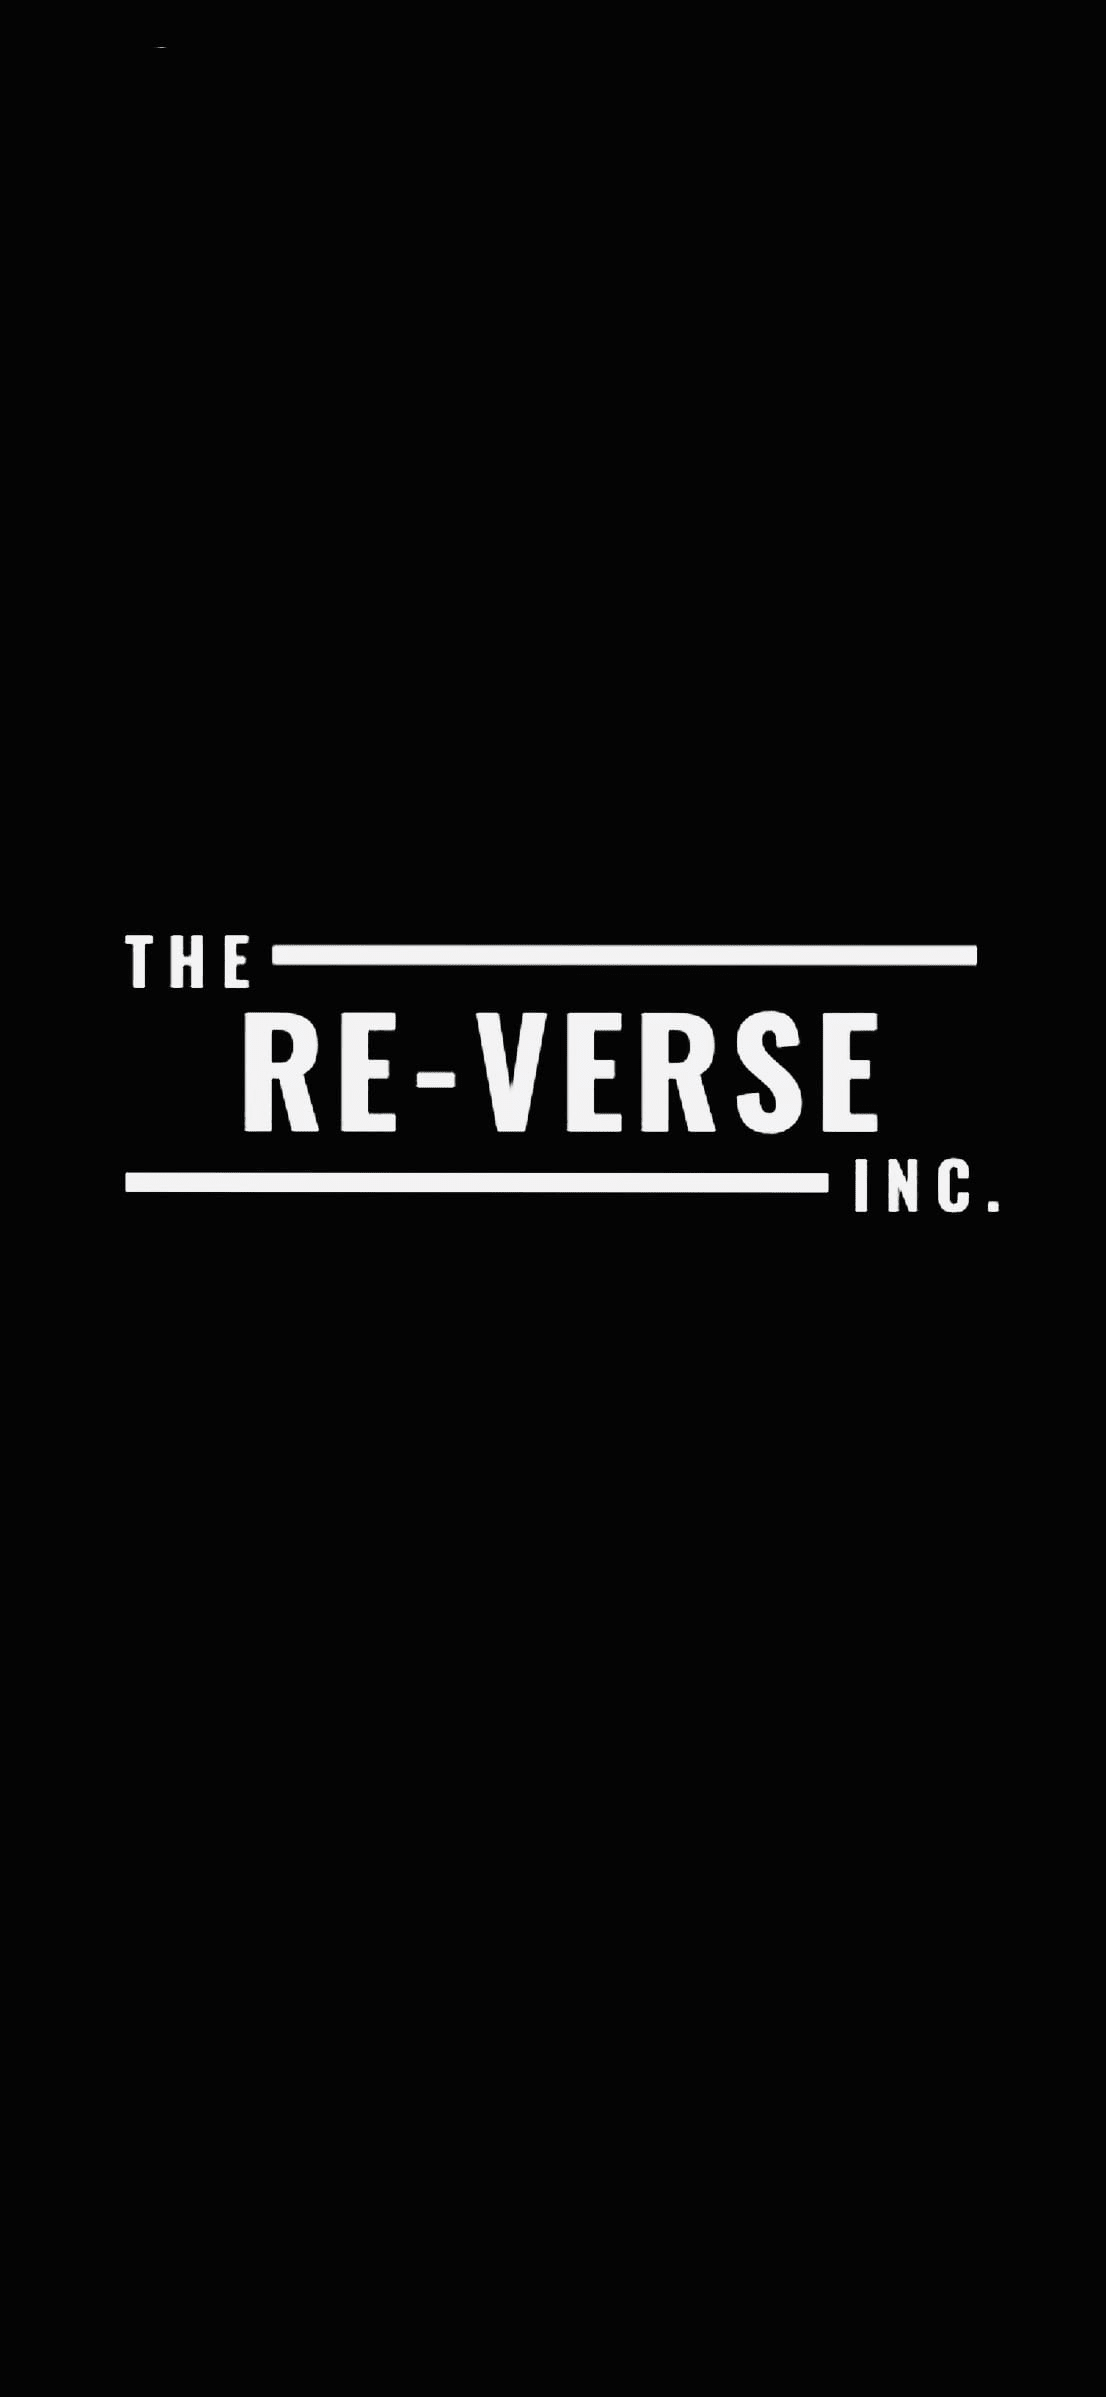 The Re-Verse